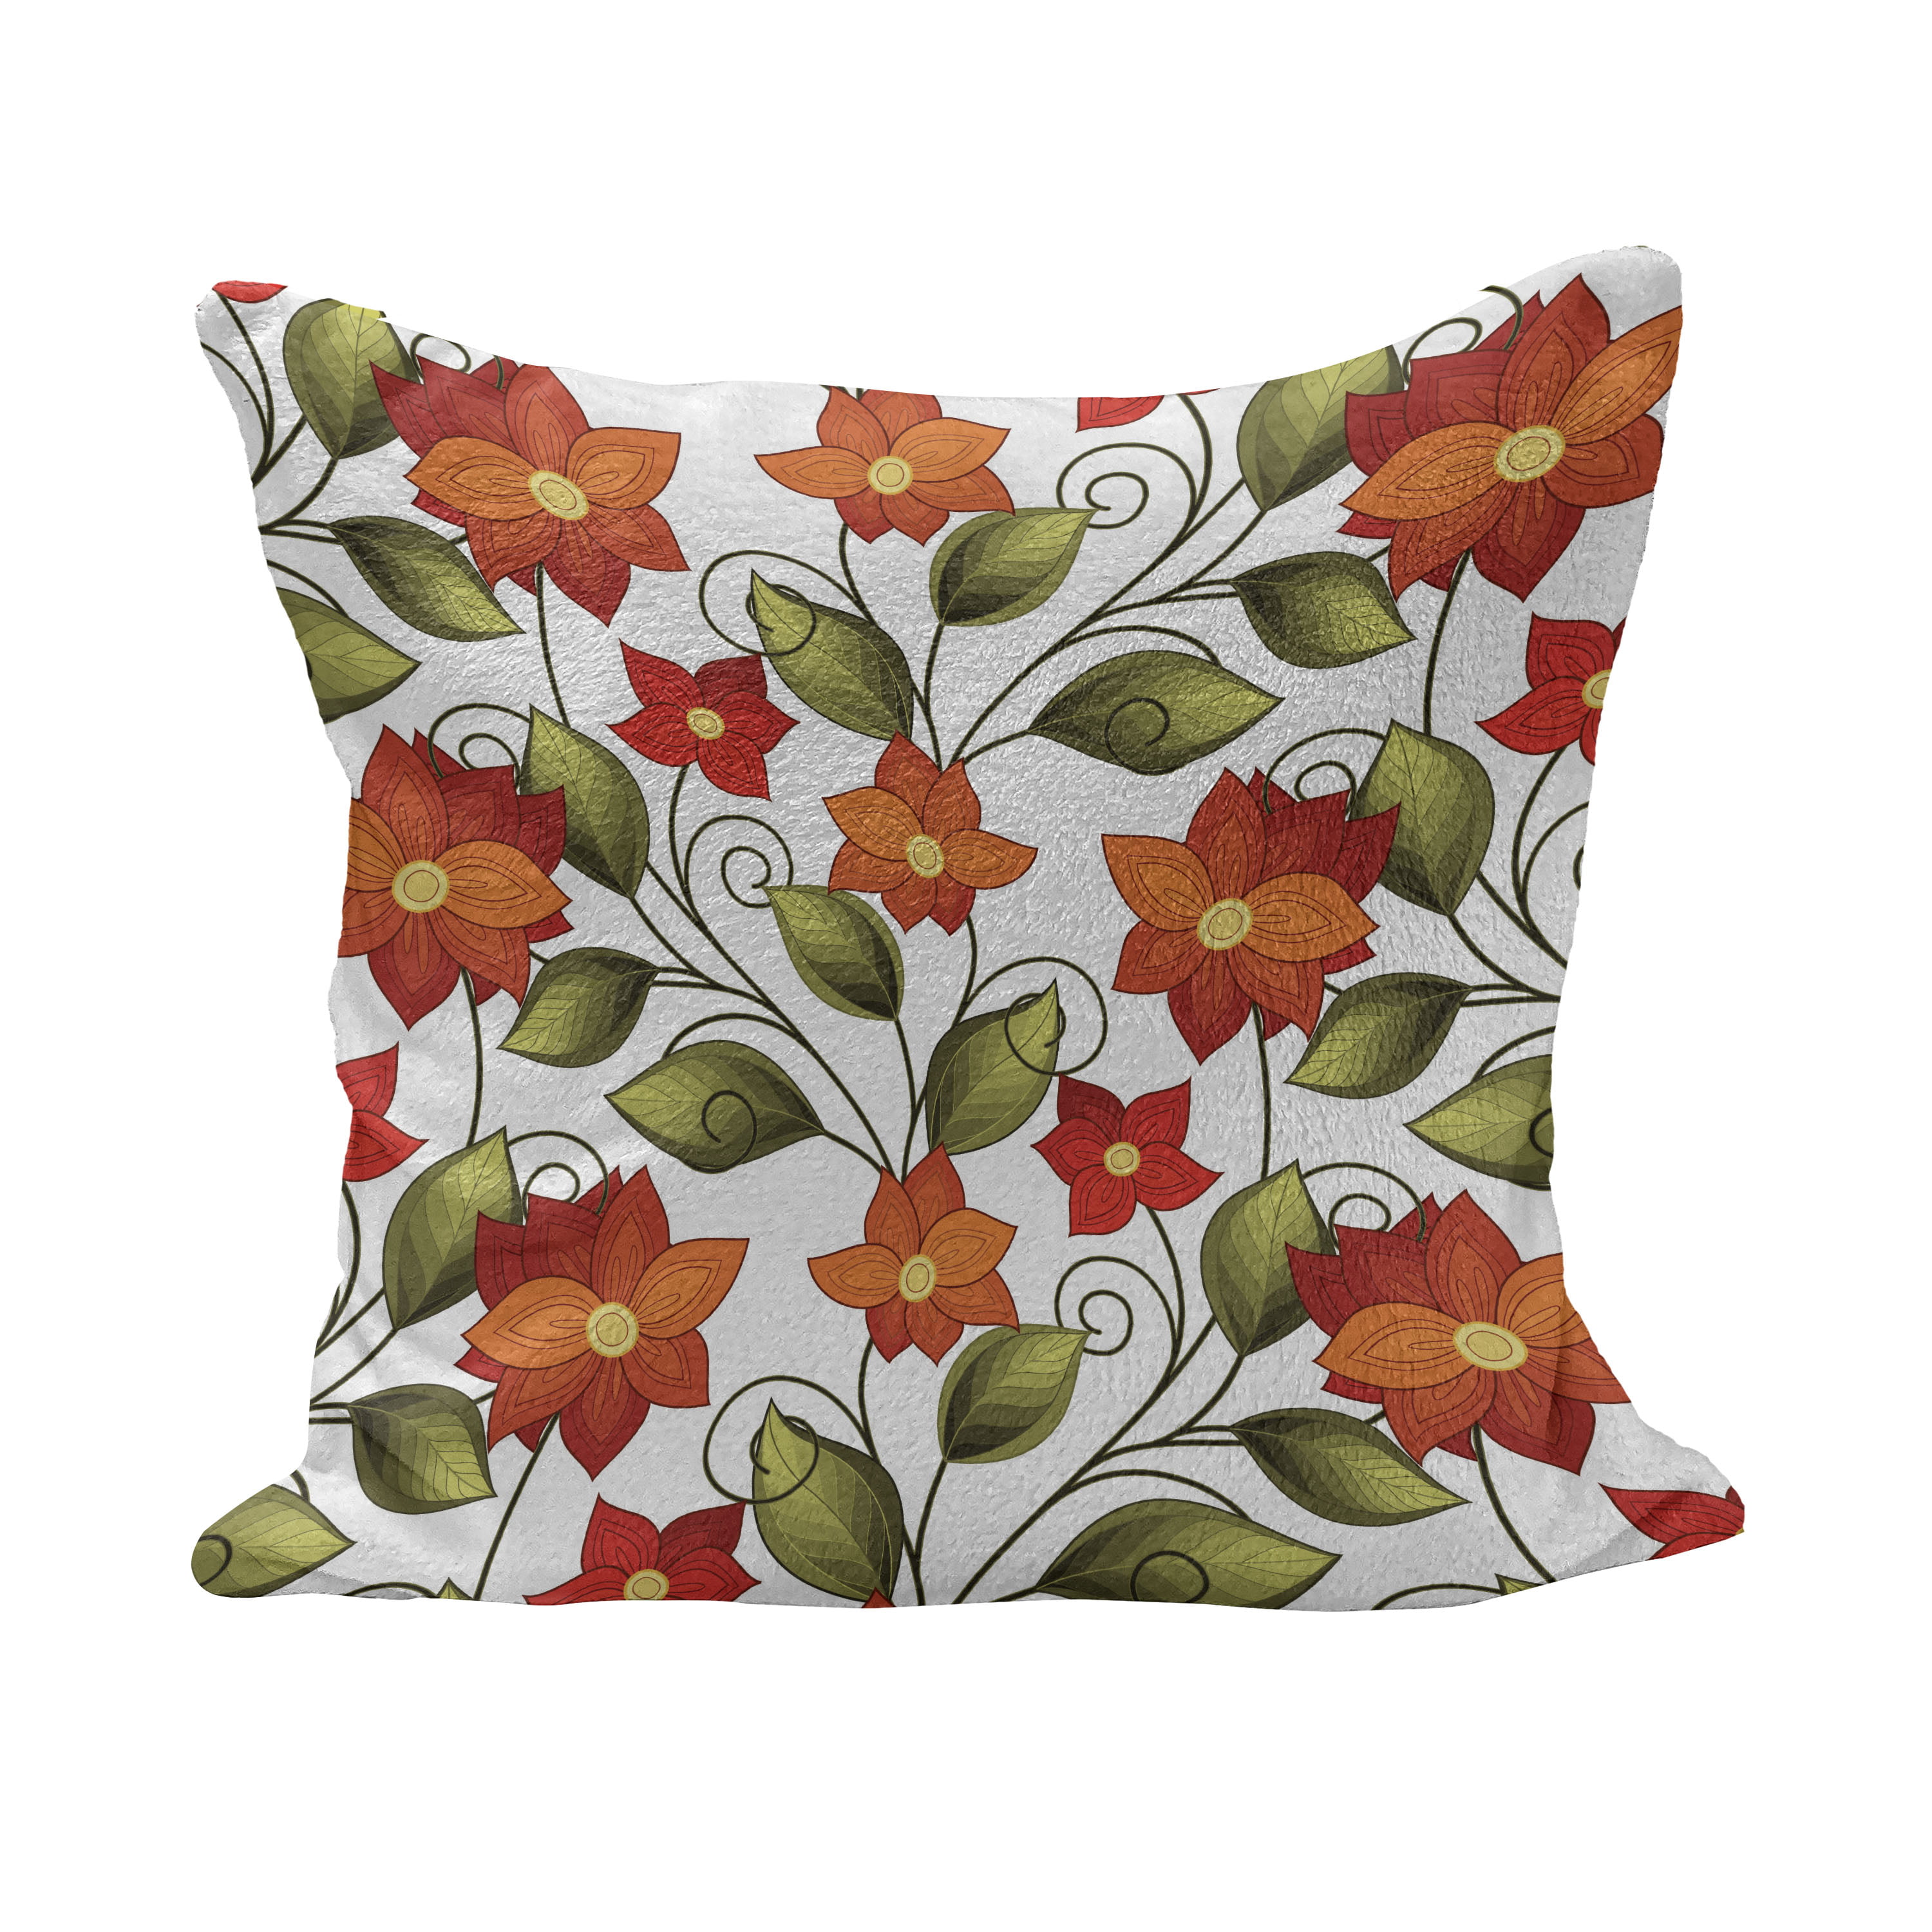 Lily print Pillow cover-Flowers pattern Throw pillow cover-Sofa Decorative cushion cover-Modern Square Pillow case-Farmhouse Pillow cover